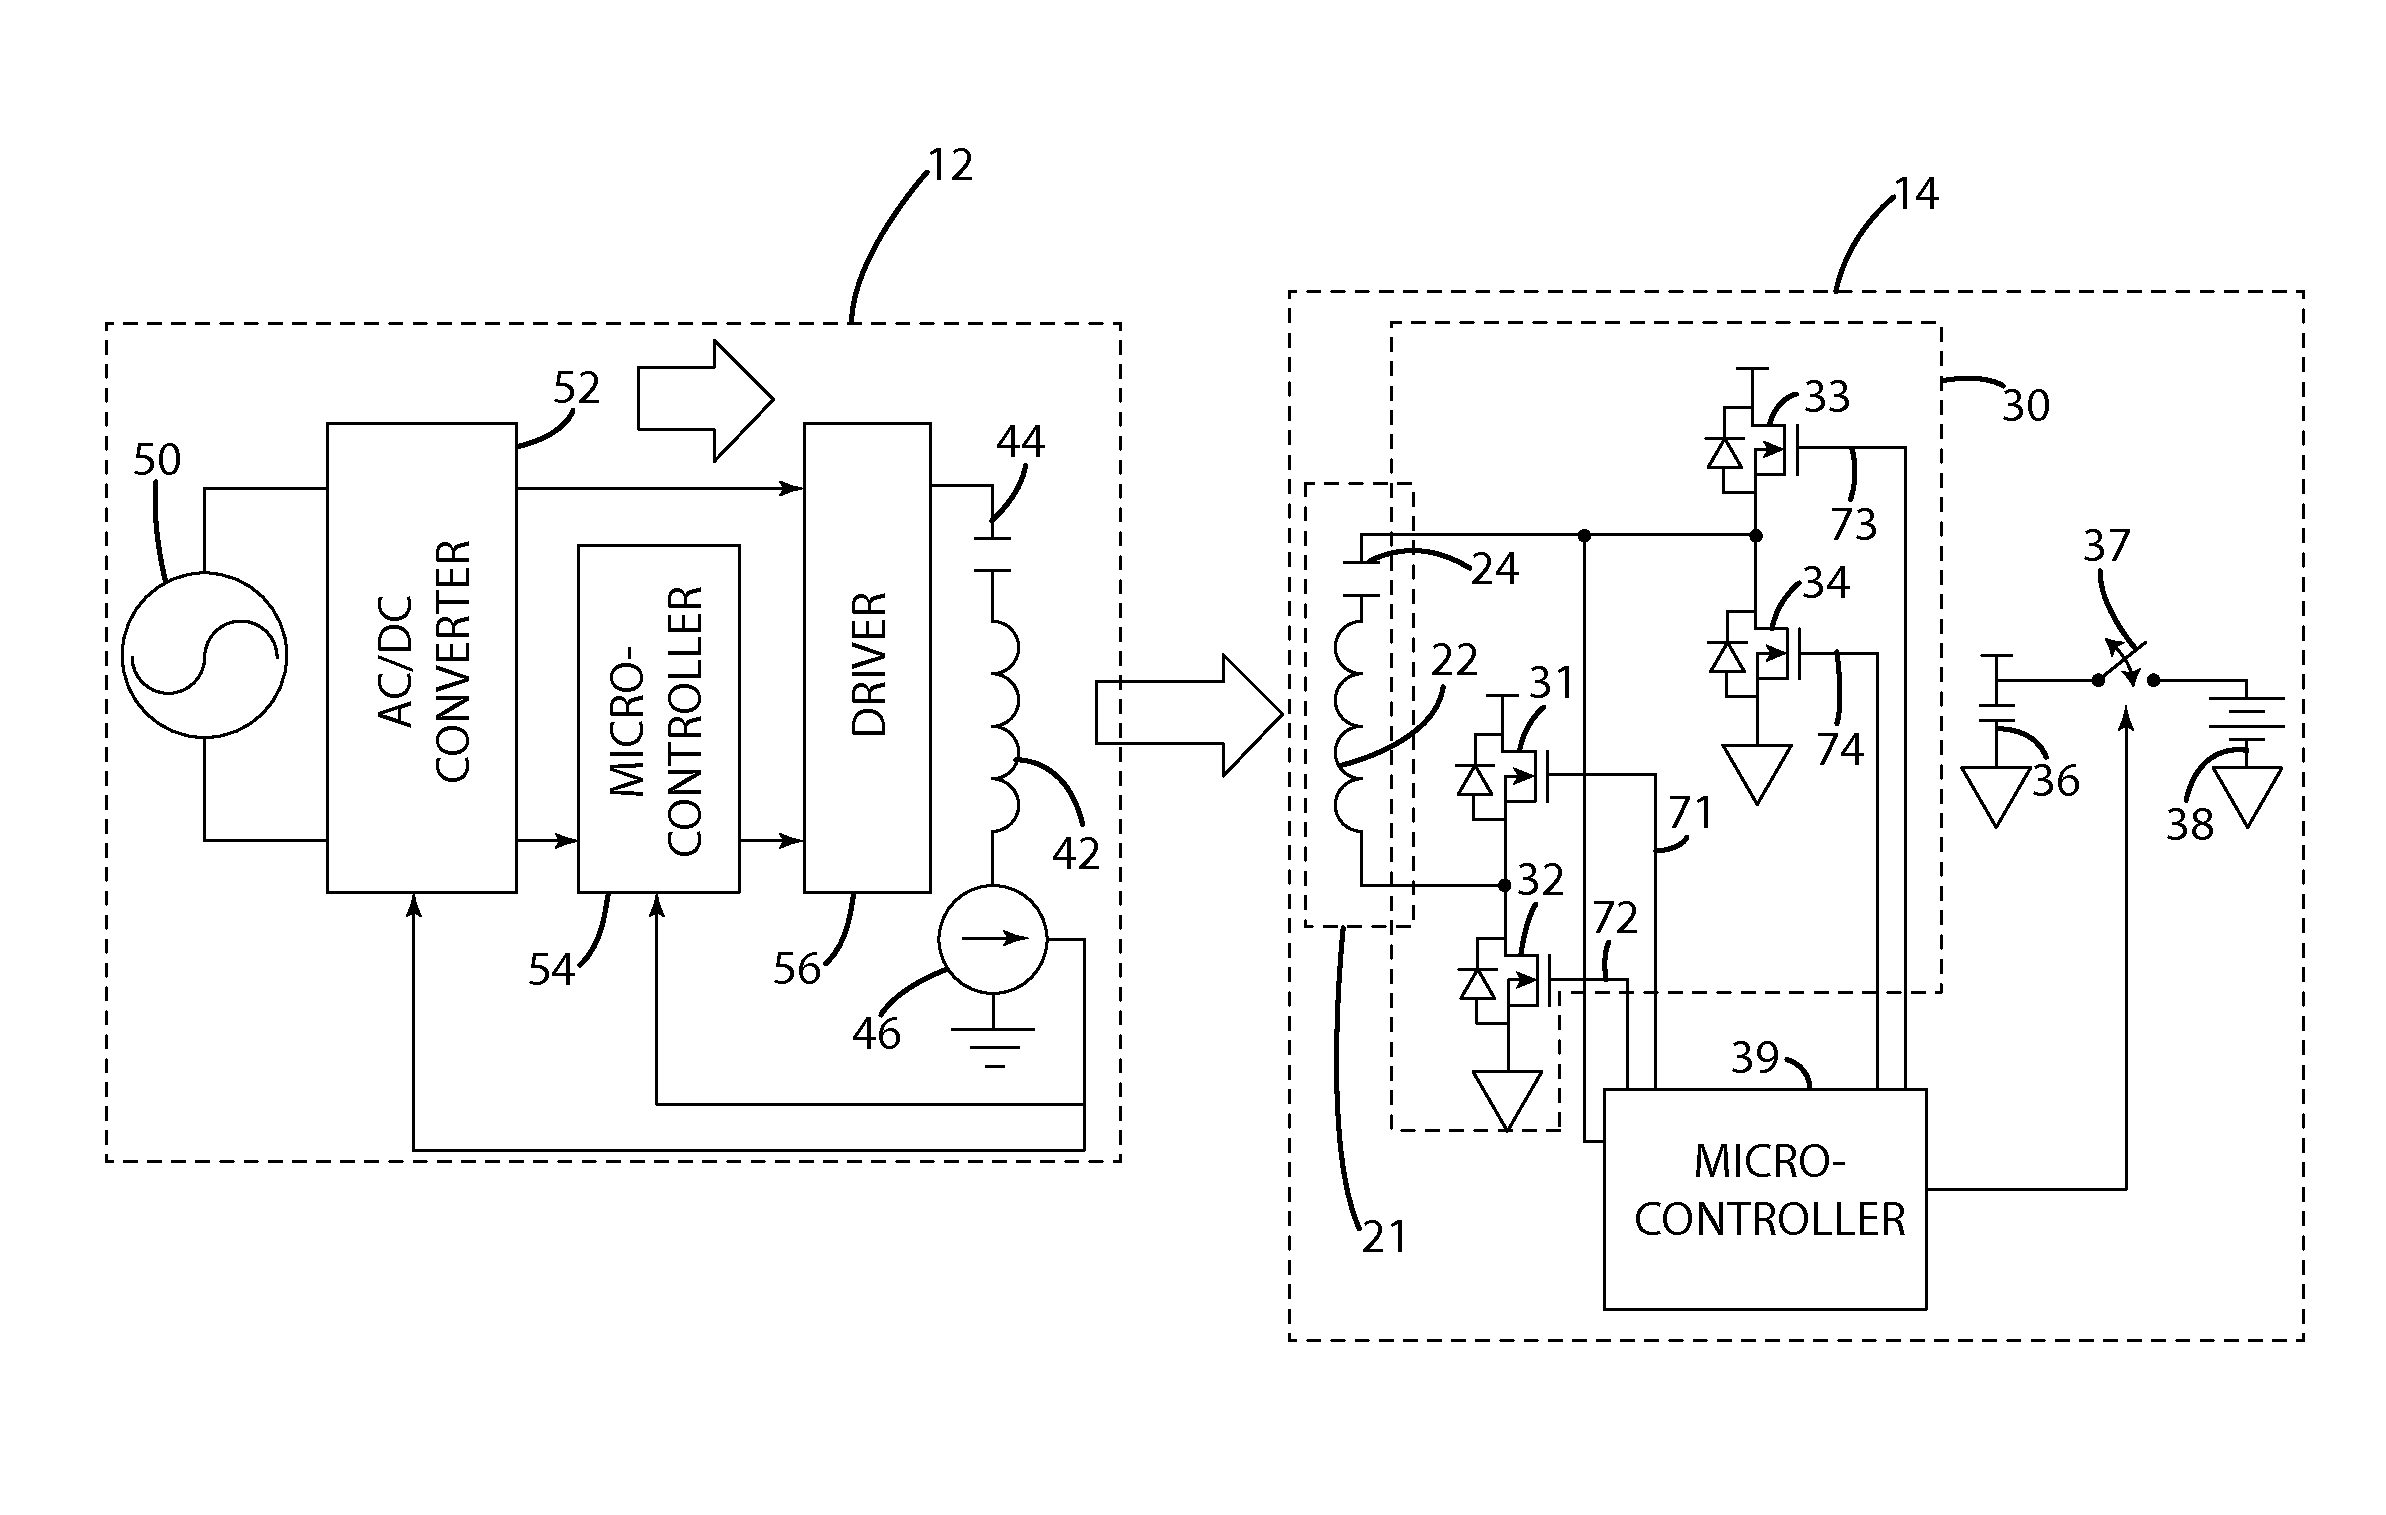 System and method for bidirectional wireless power transfer